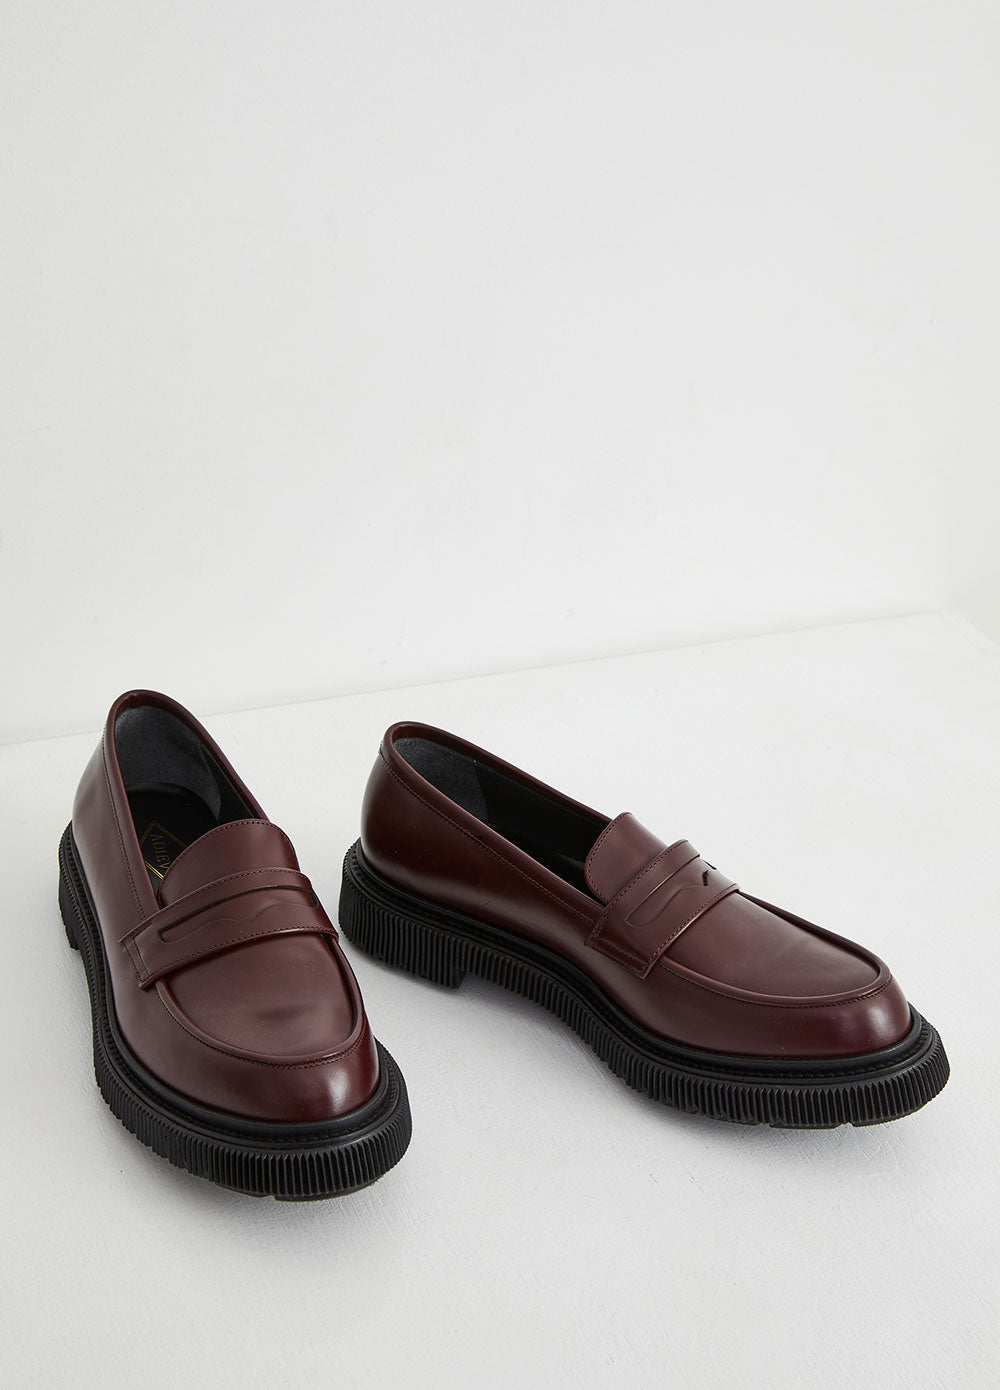 Type 159 Loafers